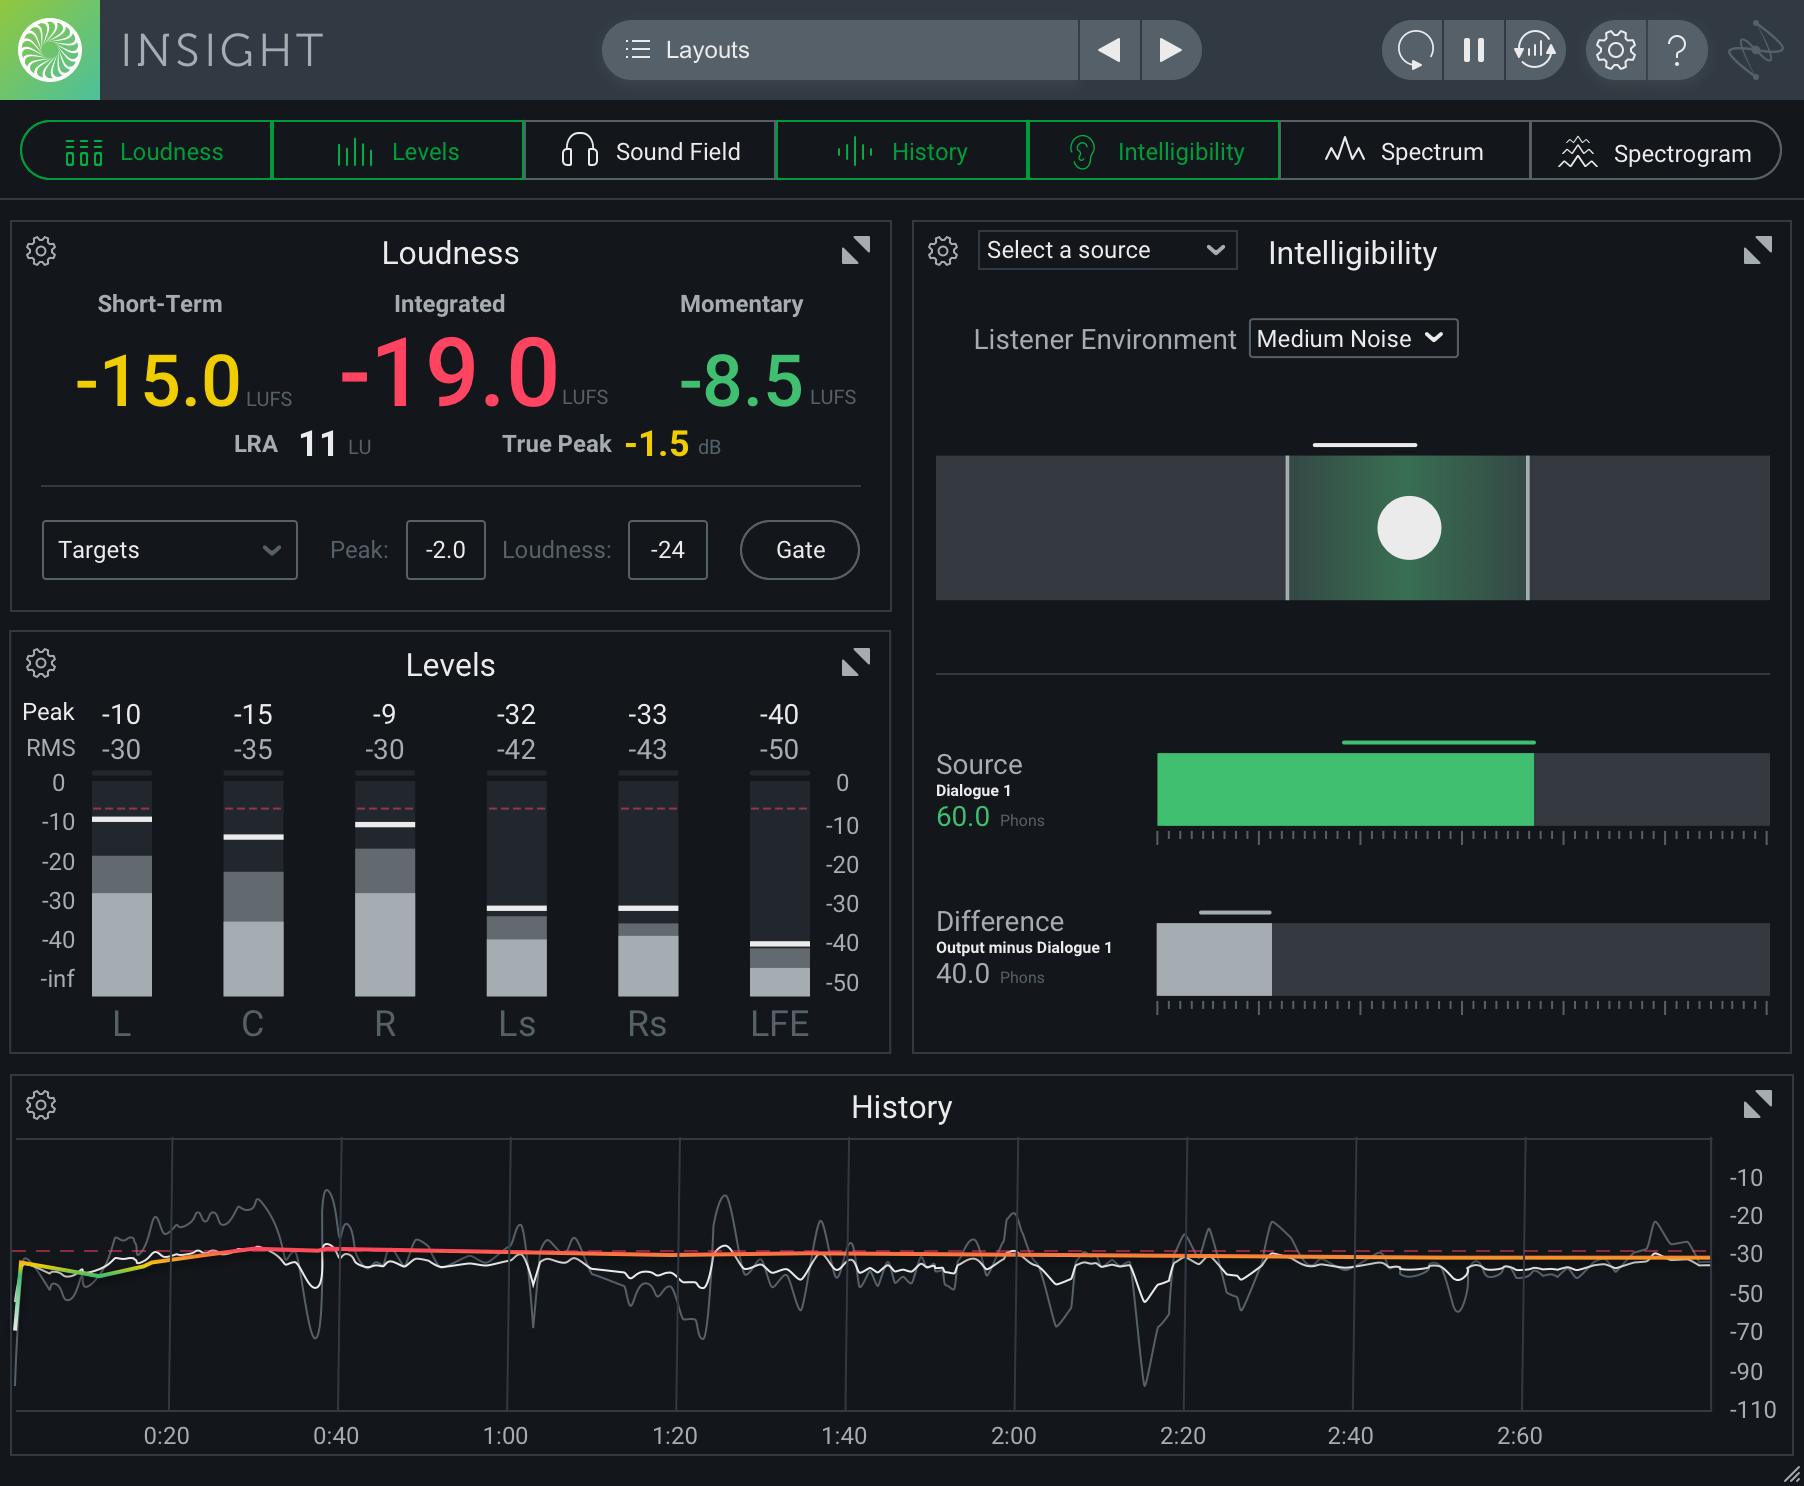 iZotope Insight 2 Upgrade from Insight 1 - Instant Delivery